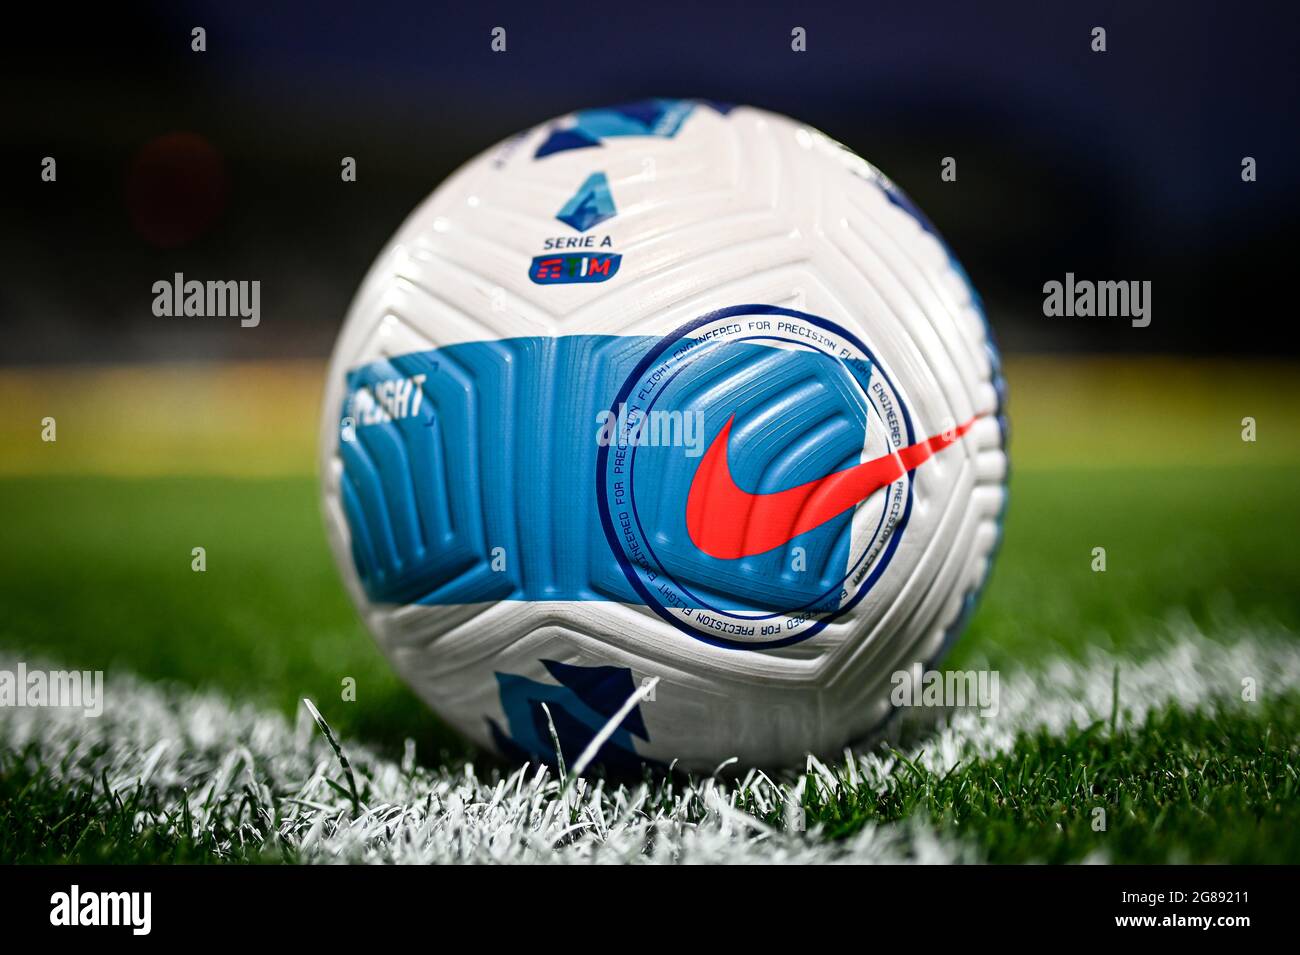 Lugano, Switzerland. 17 July 2021. Official Serie A match ball 'Nike  Flight' is seen during the pre-season friendly football match between FC  Lugano and FC Internazionale. Regular time ended 2-2, FC Internazionale